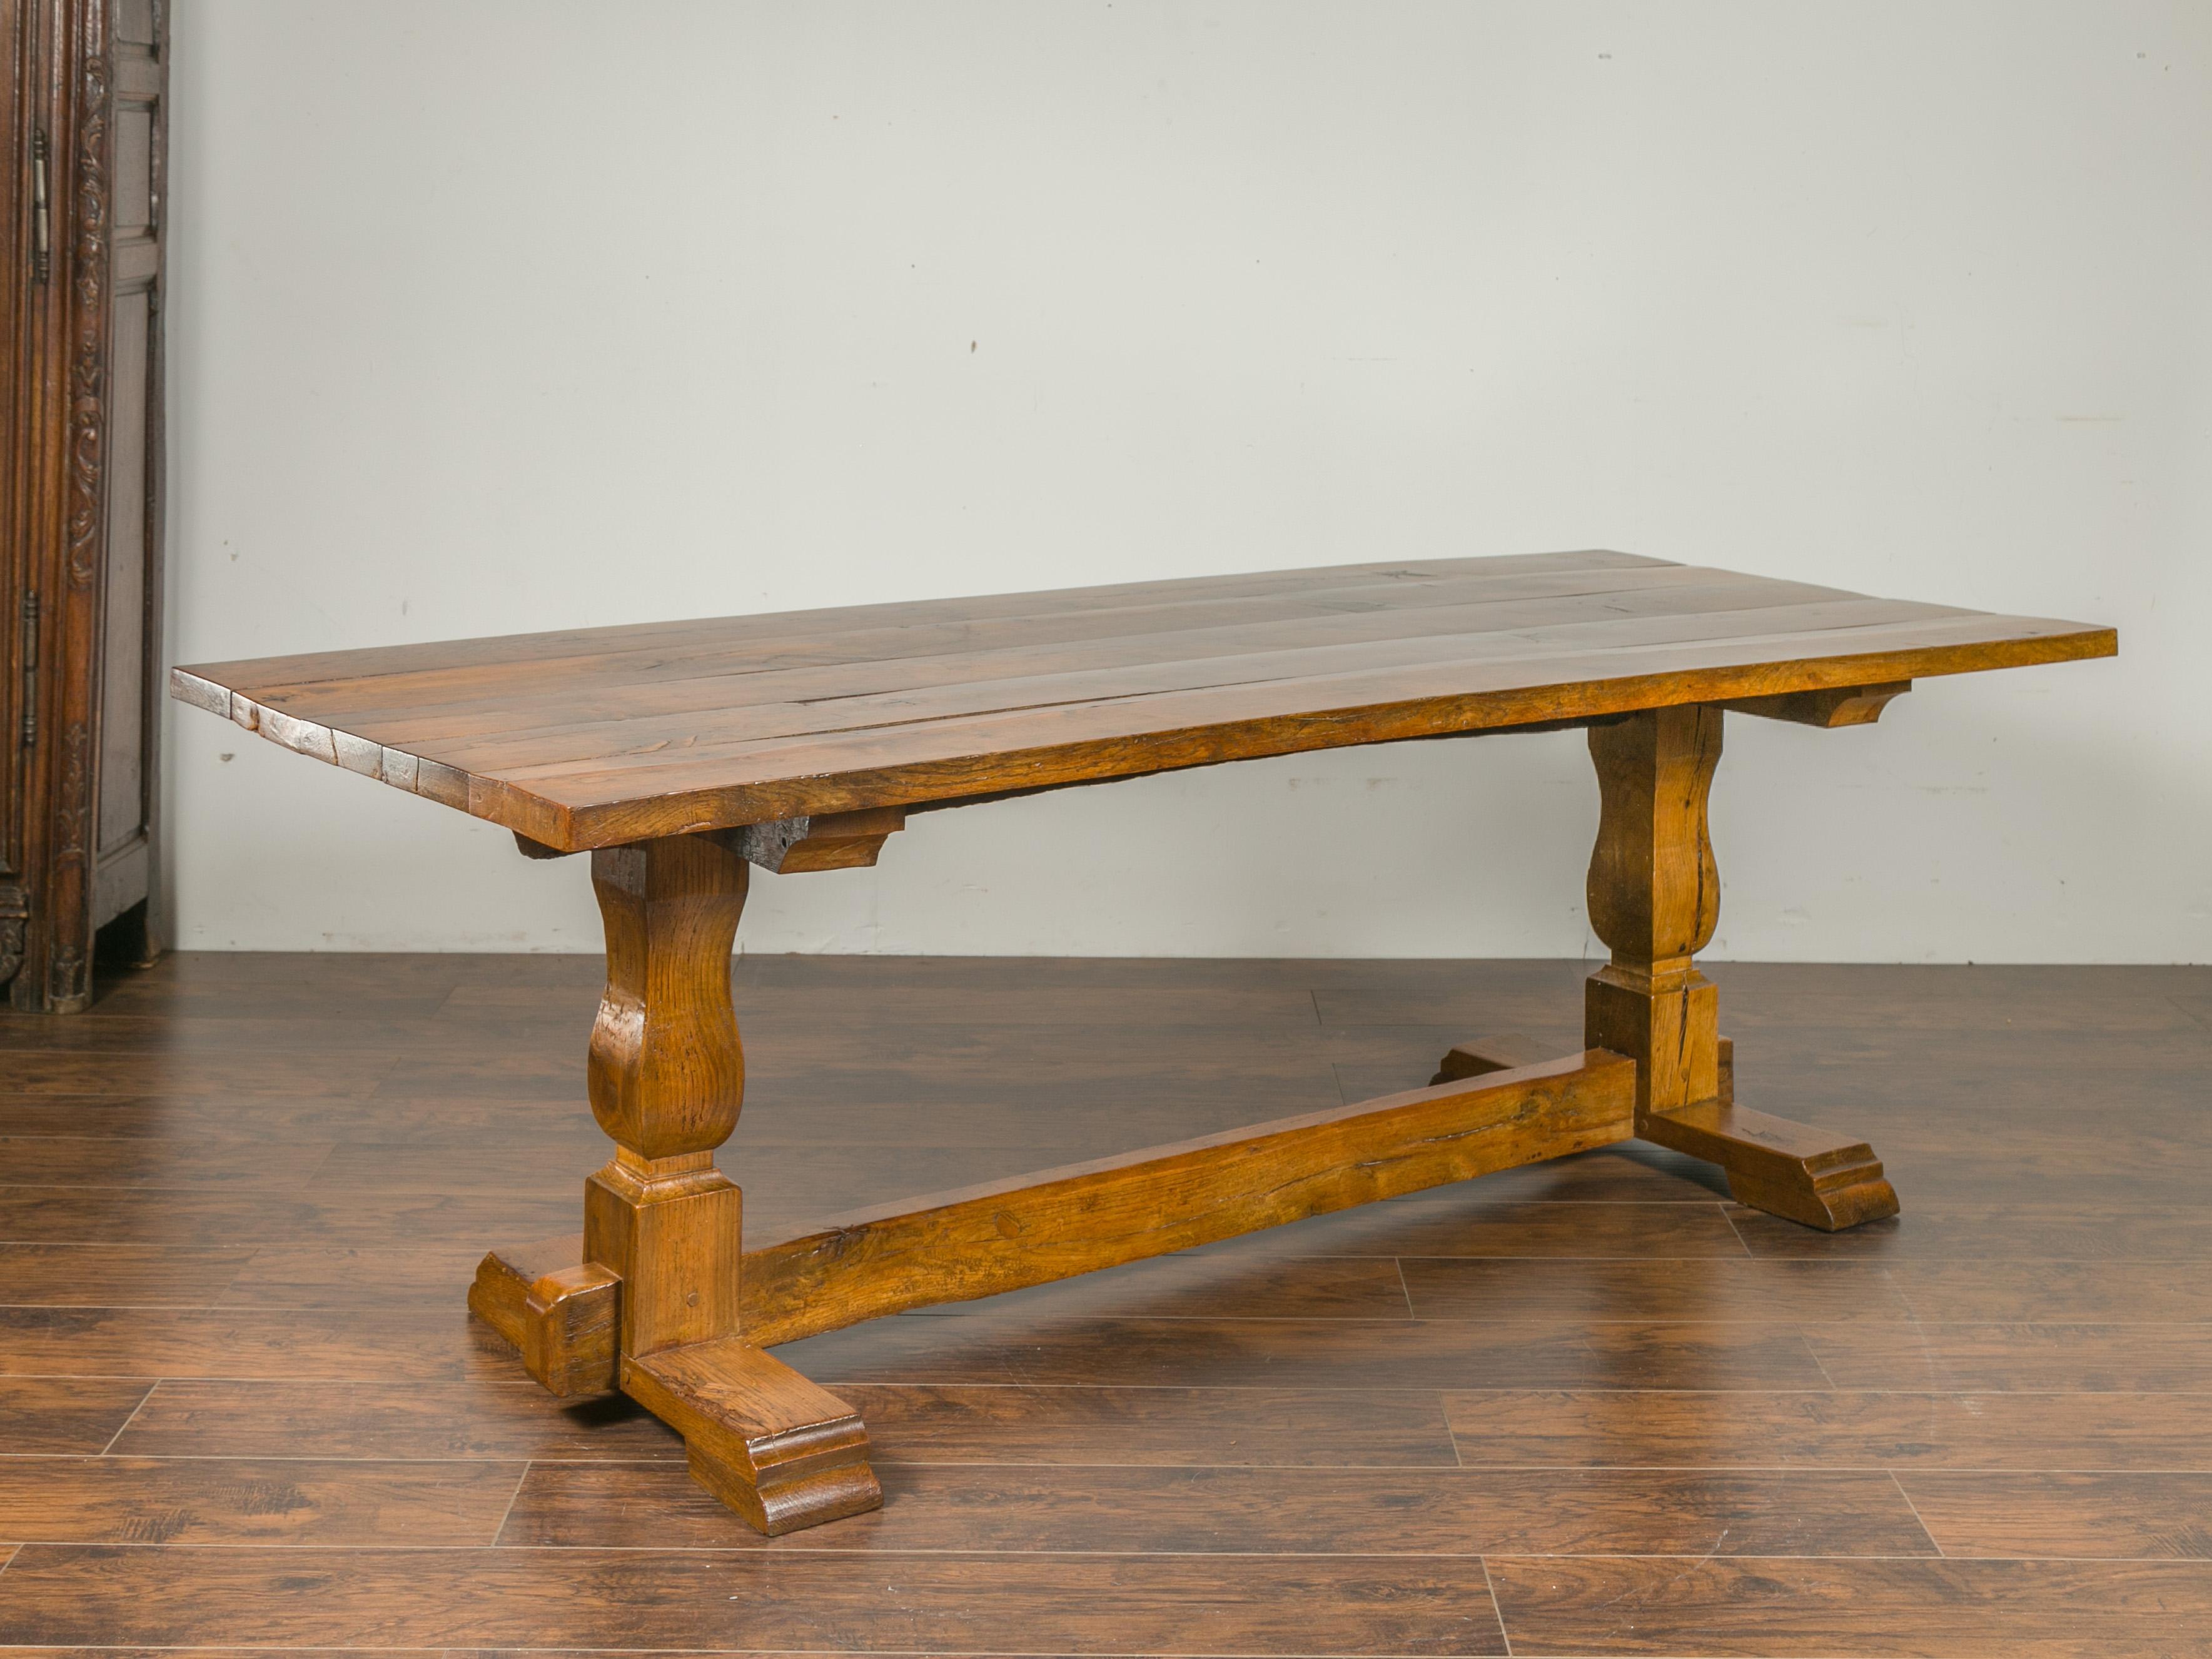 An English elm and walnut farm table from the late 19th century, with trestle base. Born in England during the third quarter of the 19th century, this farm table features a rectangular planked top sitting above a trestle base showcasing baluster